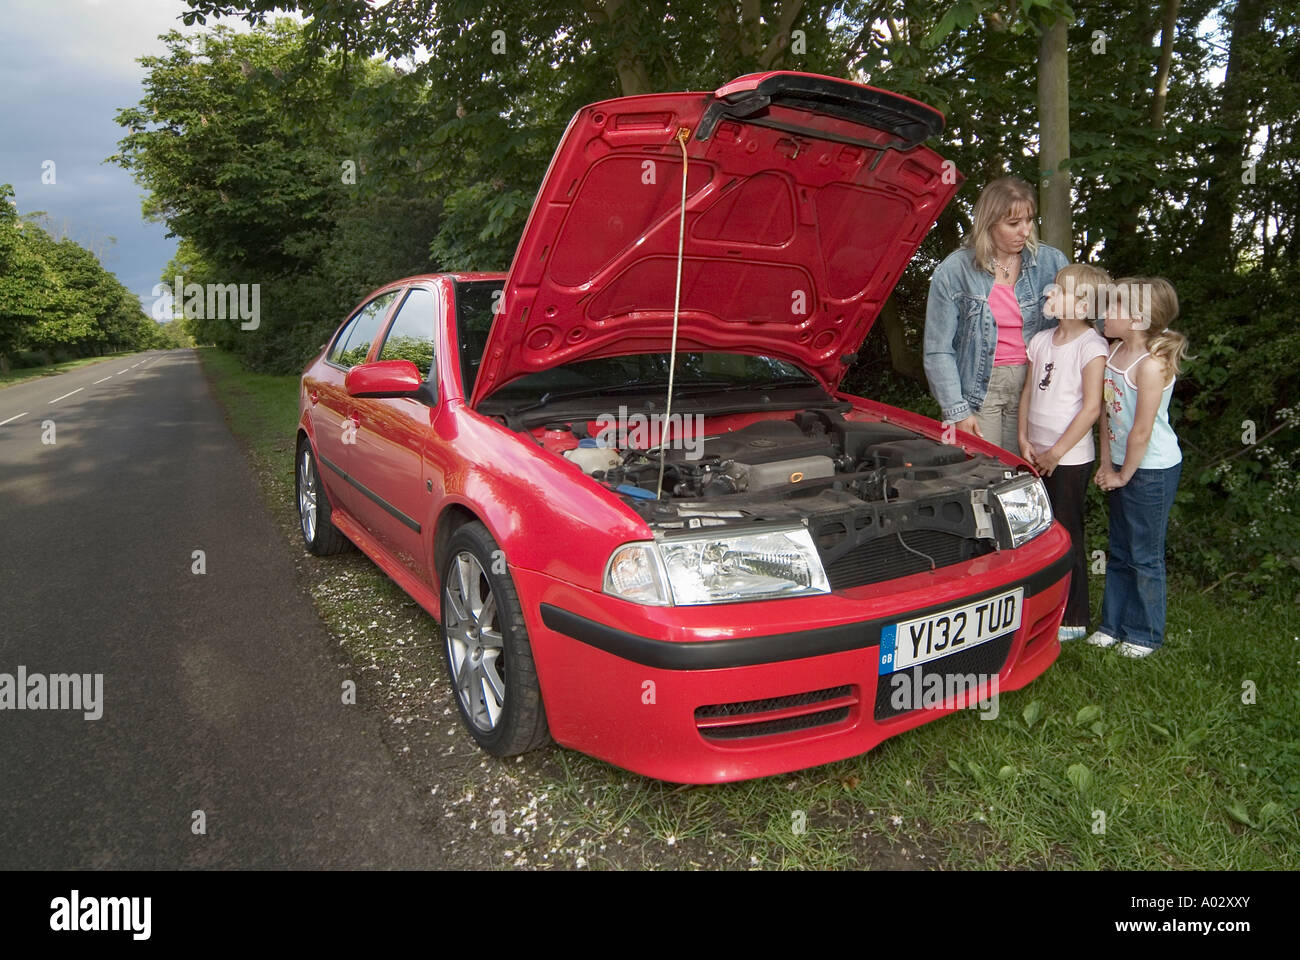 family-with-a-broken-down-car-awaiting-assistance-A02XXY.jpg